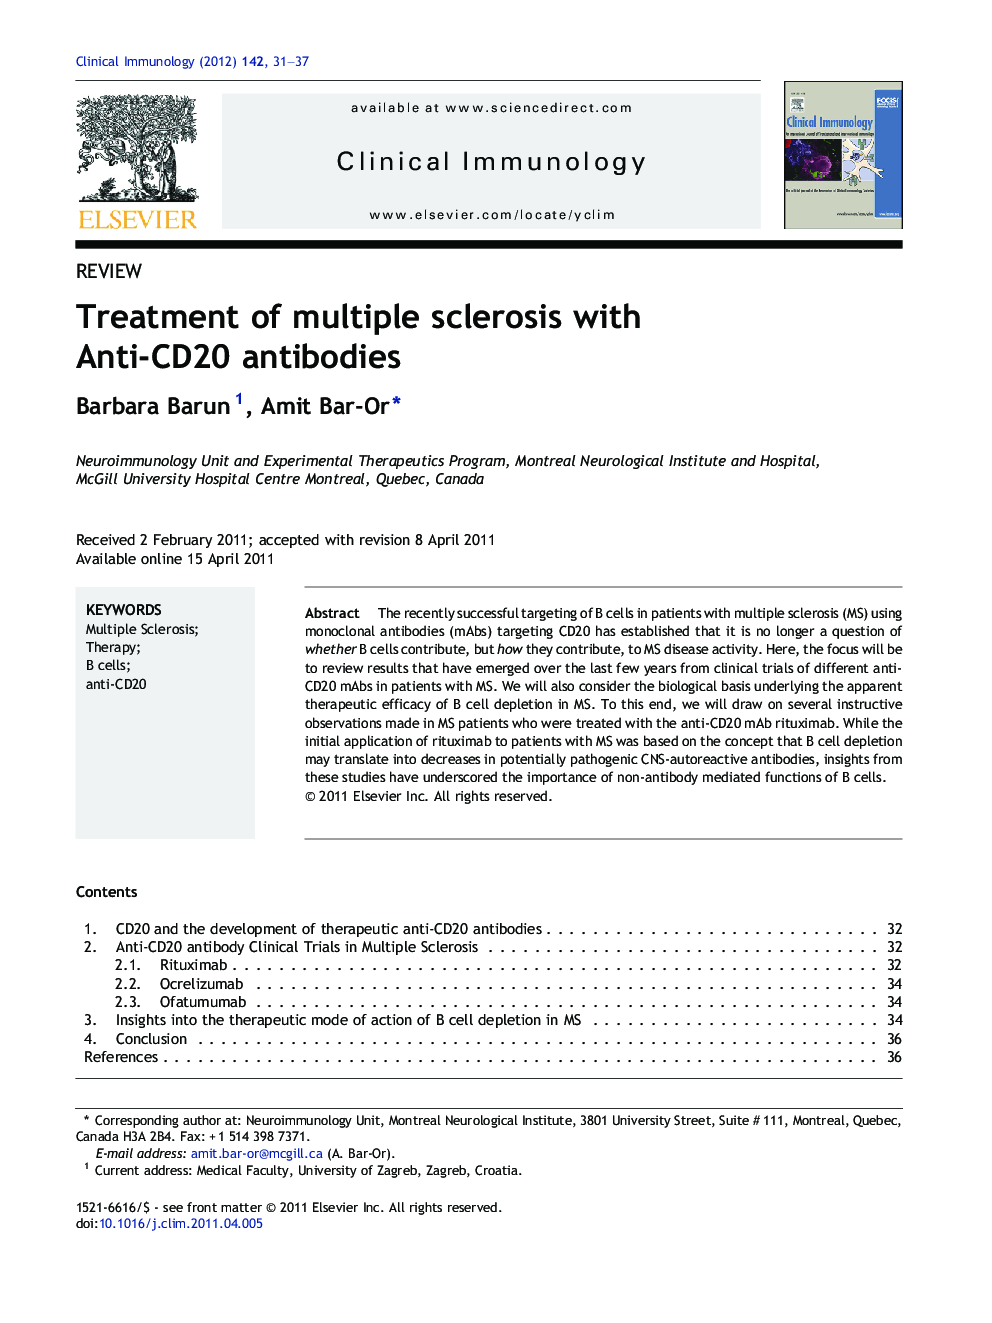 Treatment of multiple sclerosis with Anti-CD20 antibodies